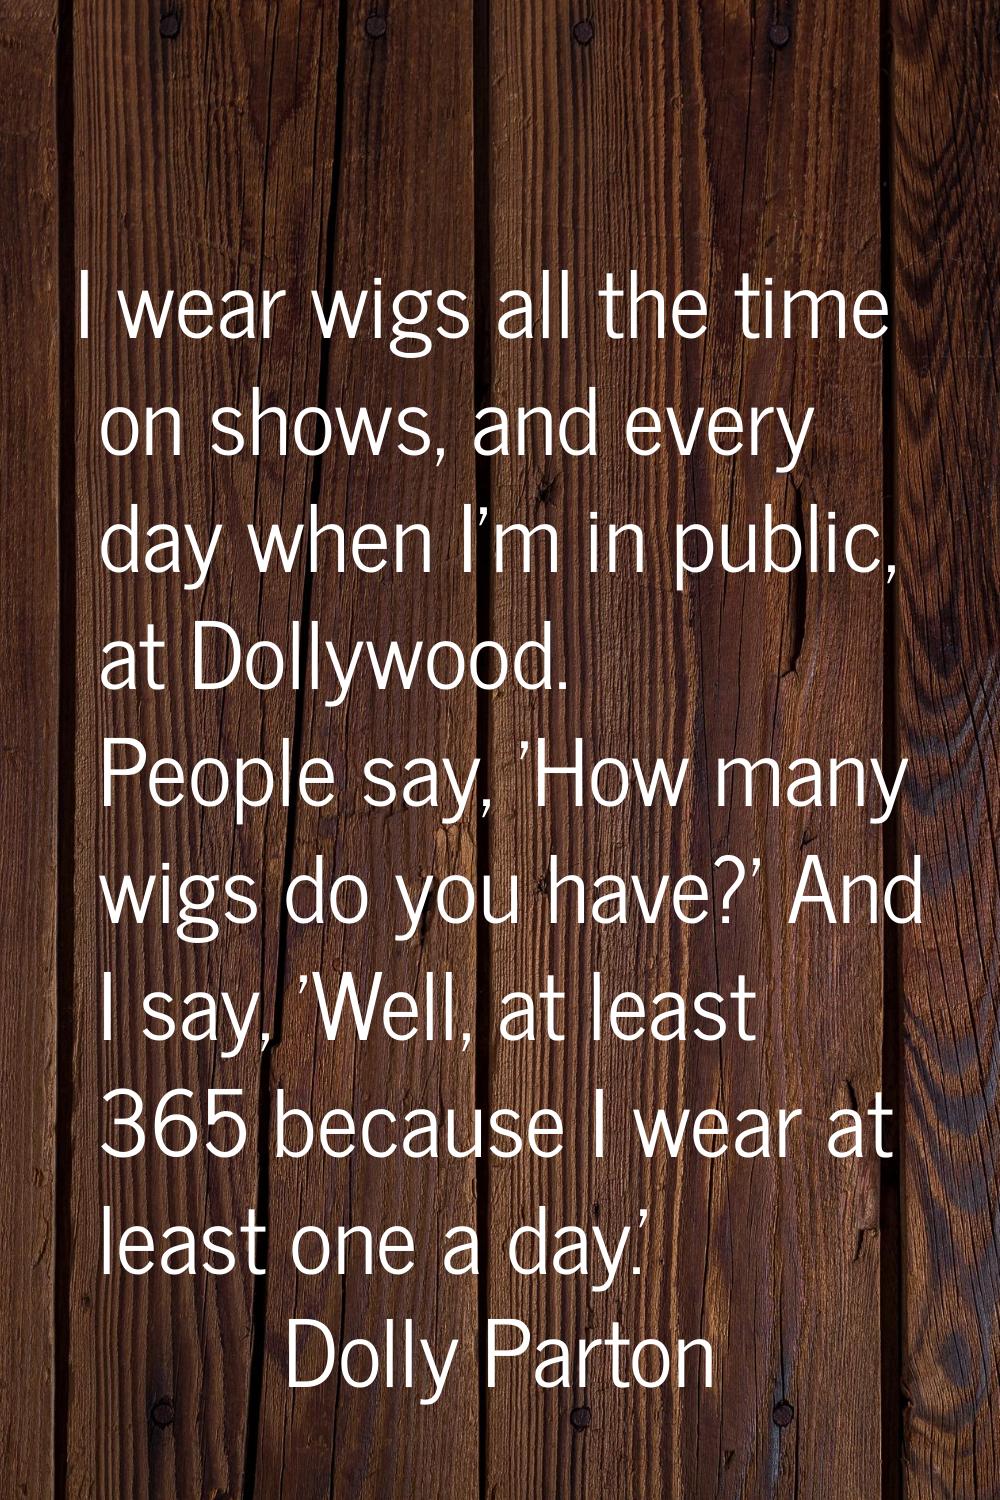 I wear wigs all the time on shows, and every day when I'm in public, at Dollywood. People say, 'How